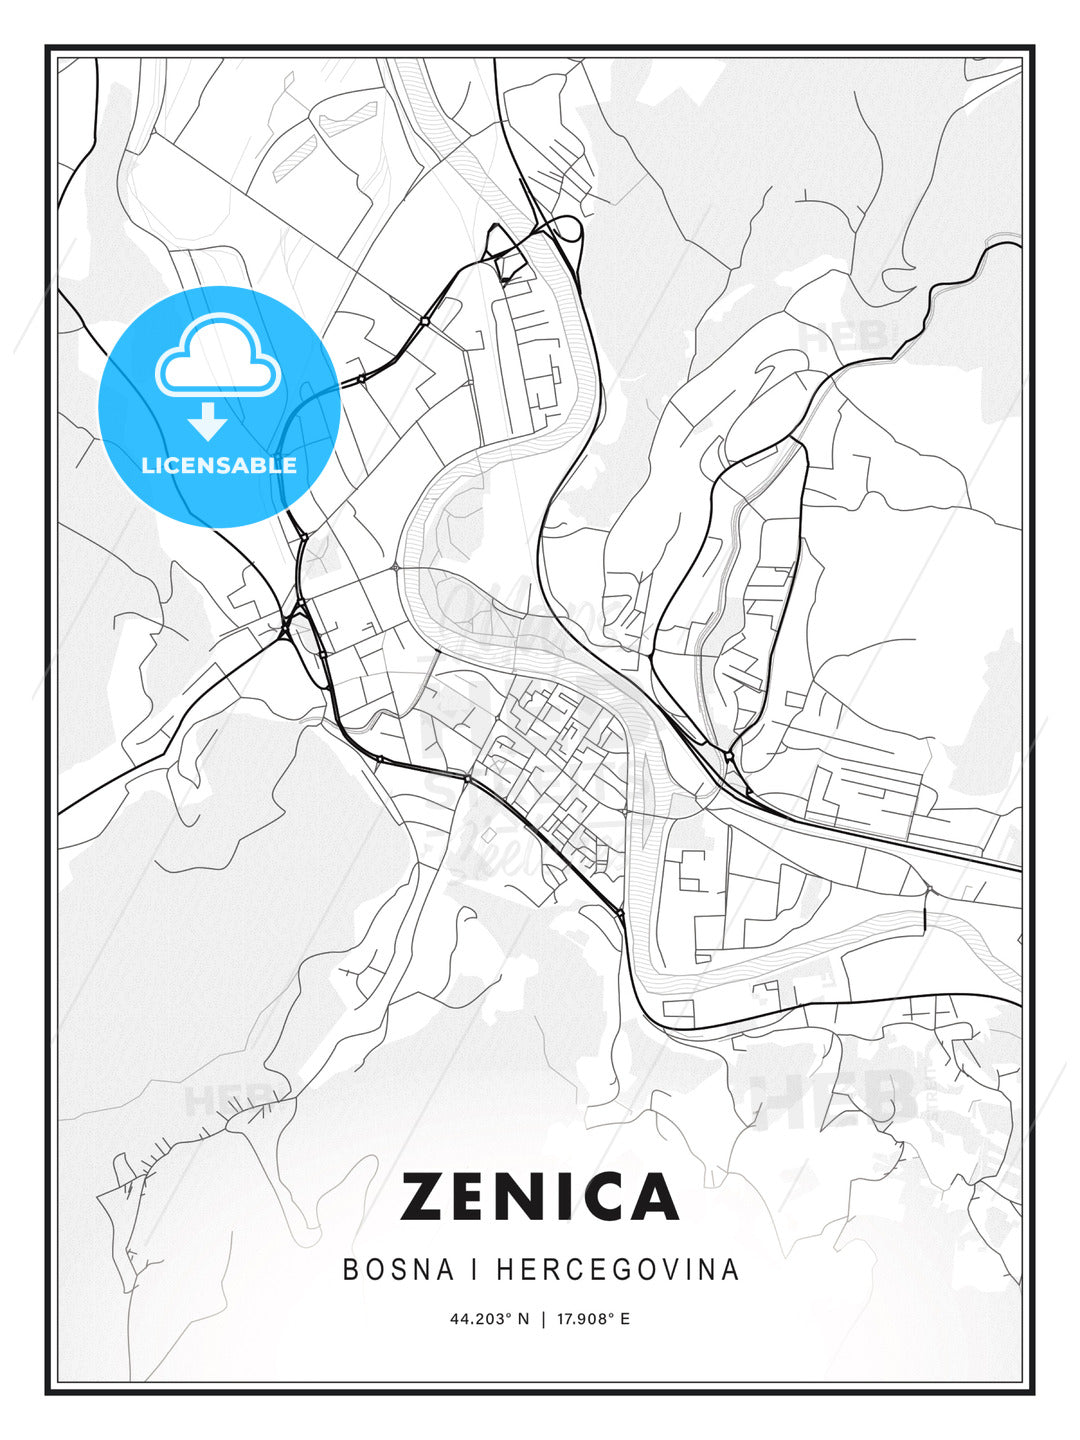 Zenica, Bosnia and Herzegovina, Modern Print Template in Various Formats - HEBSTREITS Sketches